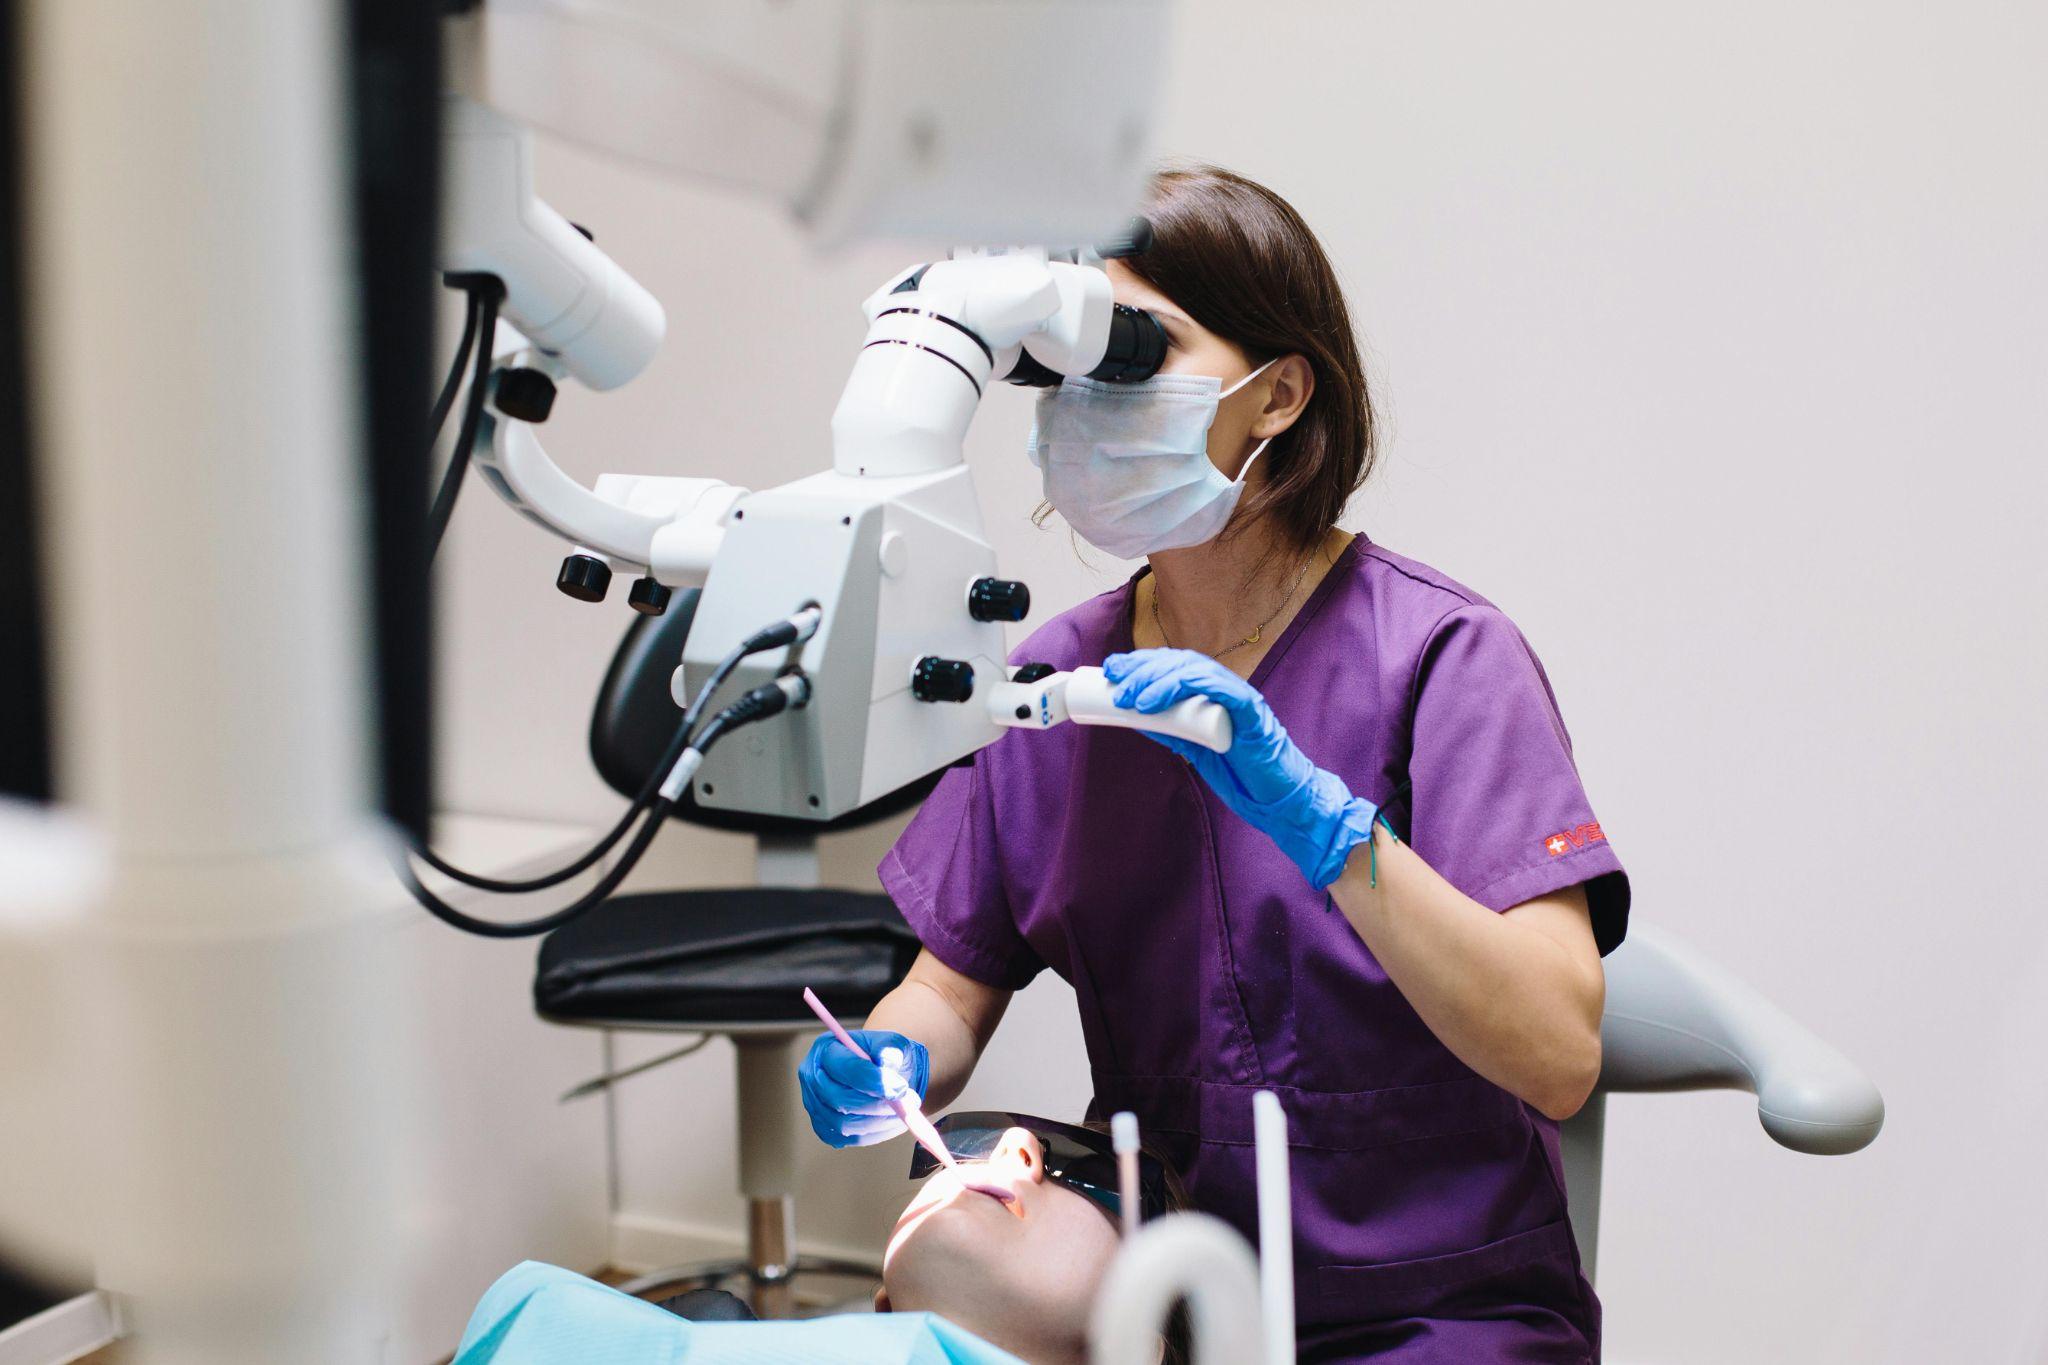 Photo by Polina Zimmerman: https://www.pexels.com/photo/woman-in-purple-scrub-using-a-dental-equipment-in-examining-a-patient-4687360/